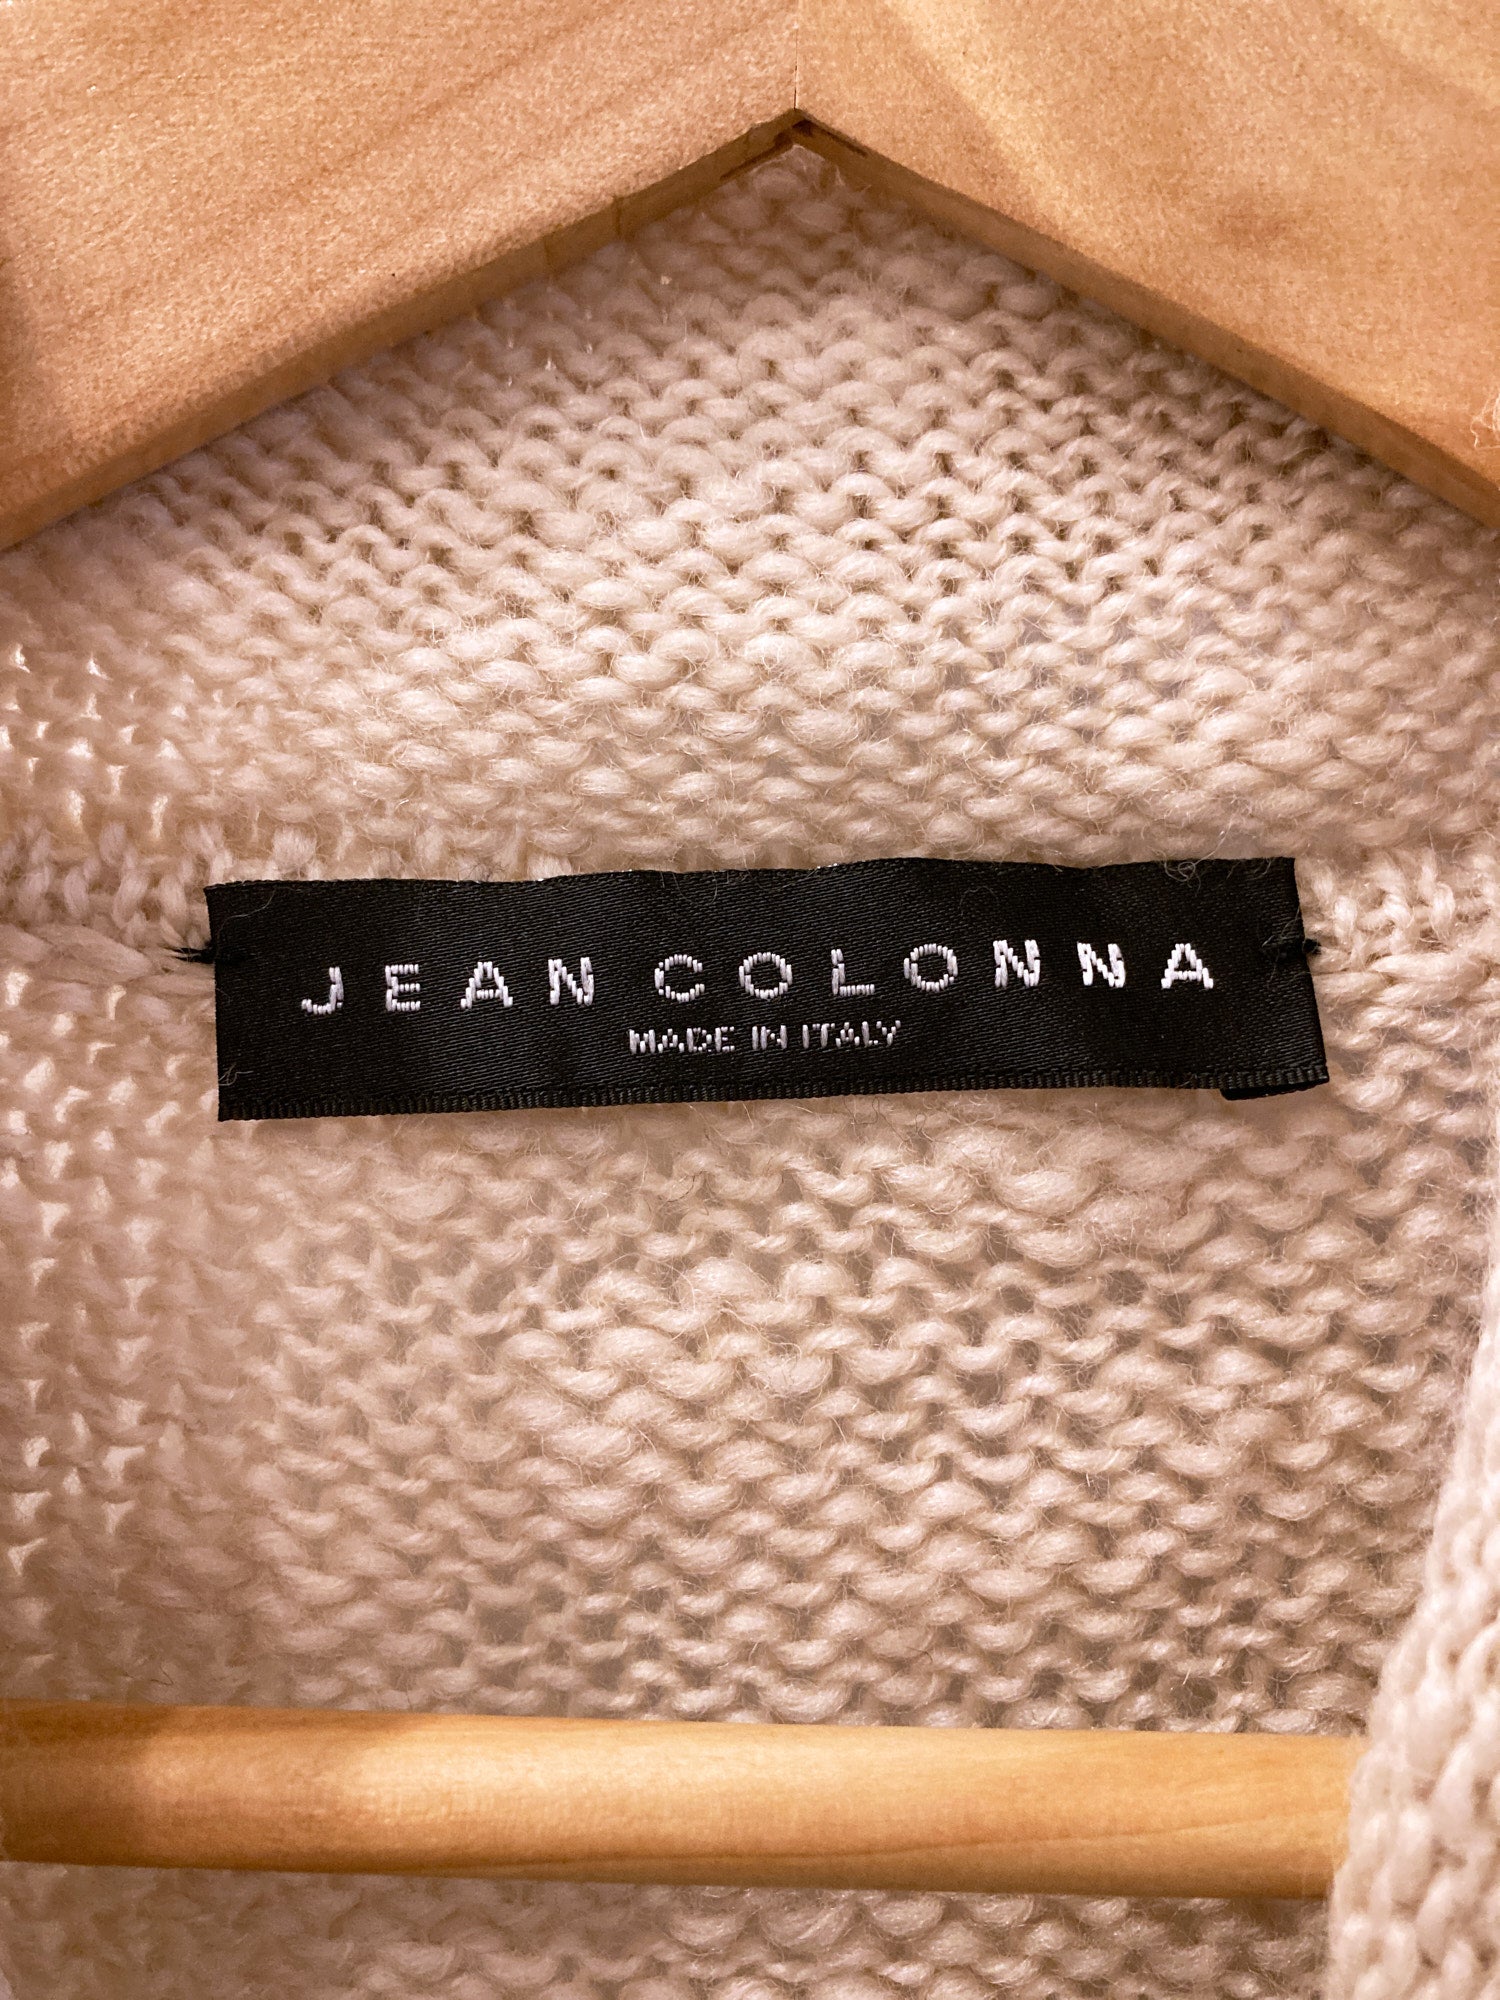 Jean Colonna beige knitted wool full length open cardigan or coat - size 40